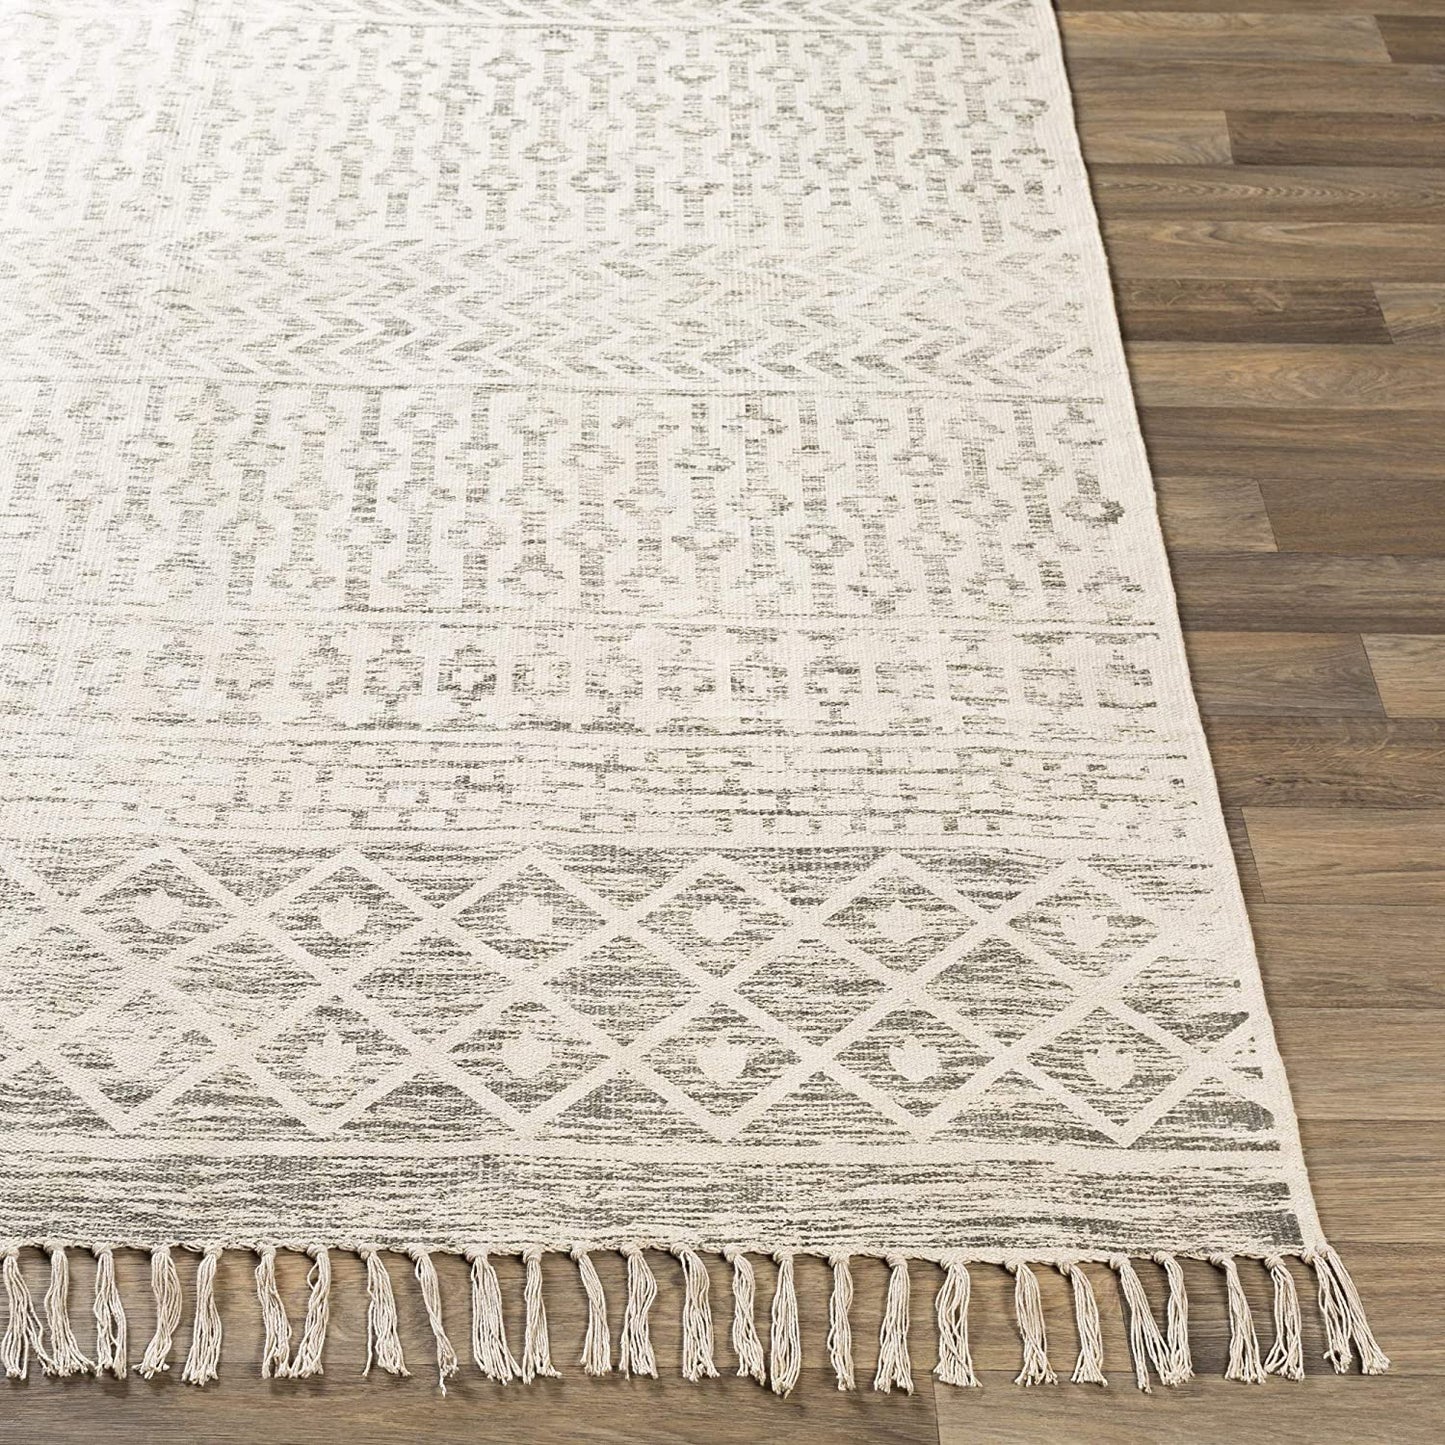 Bohemian Moroccan Soft Area Rug, Ivory Charcoal